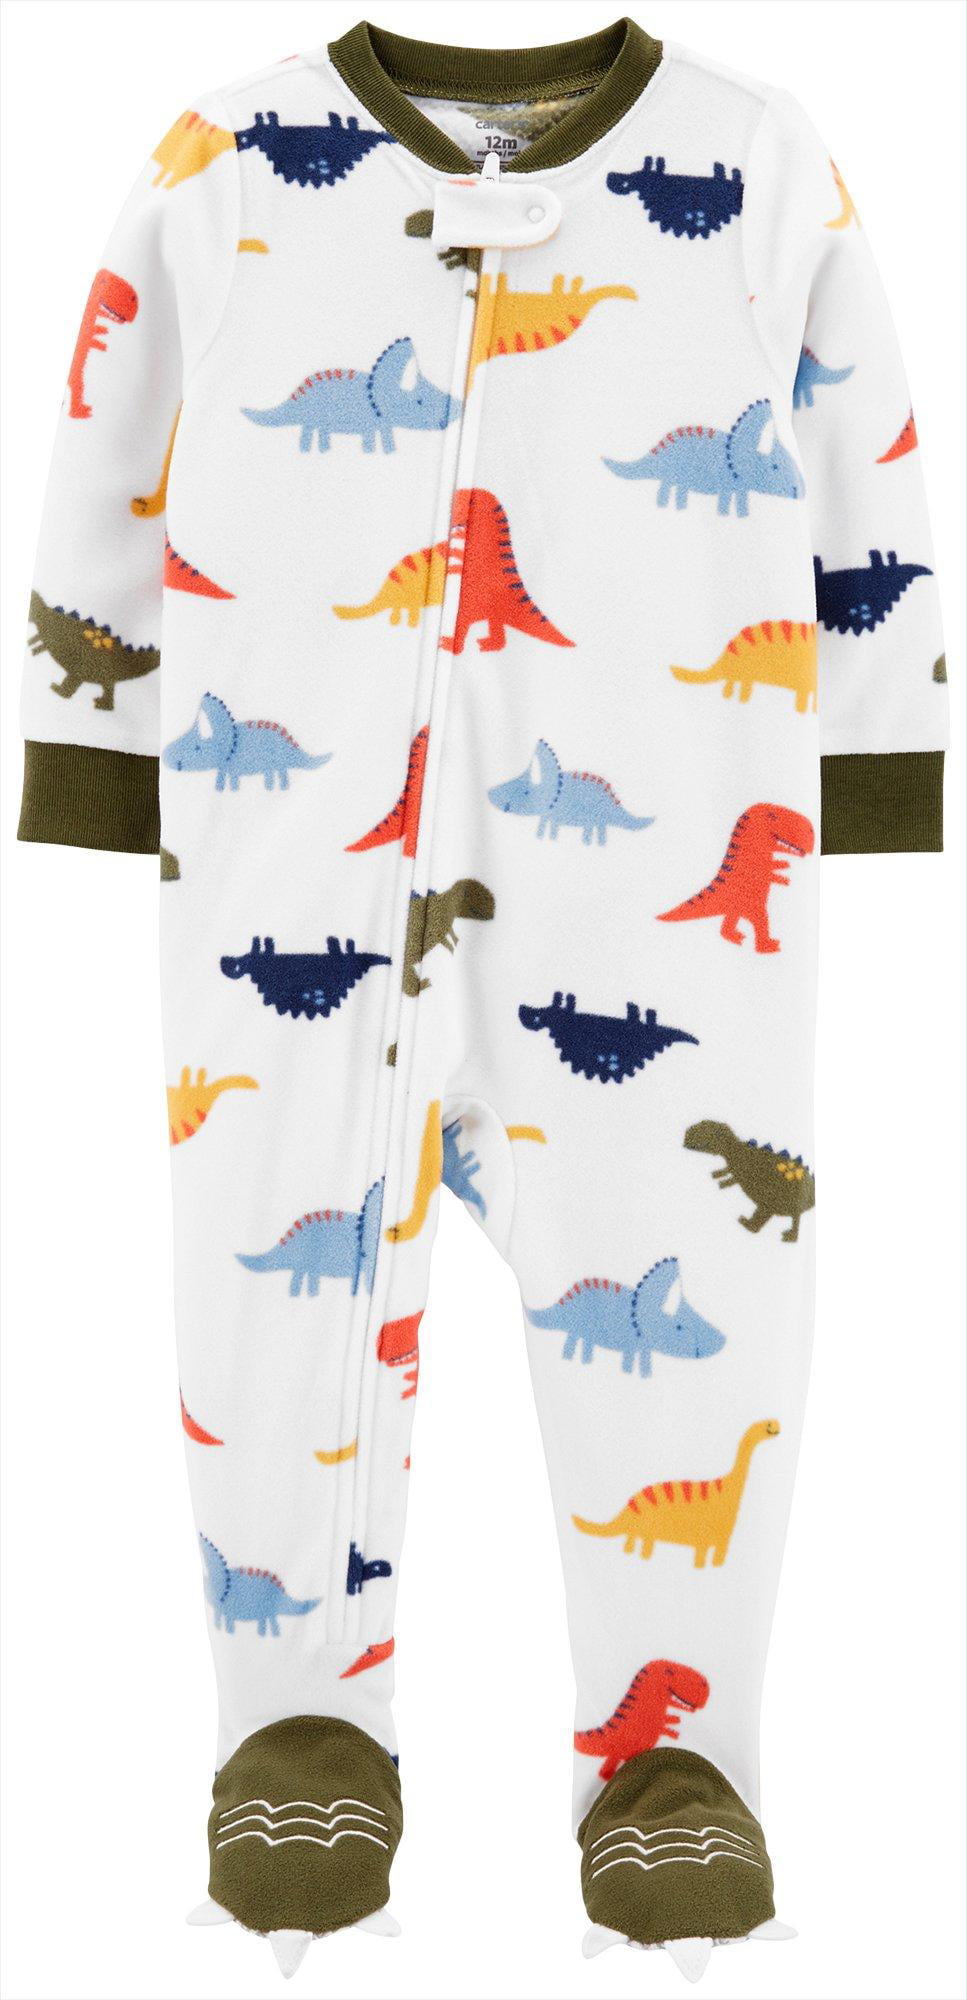 NWt carters dinosaur sleeper pajamas footed 2t 3t 4t 5t 3 4 5 matching brothers 